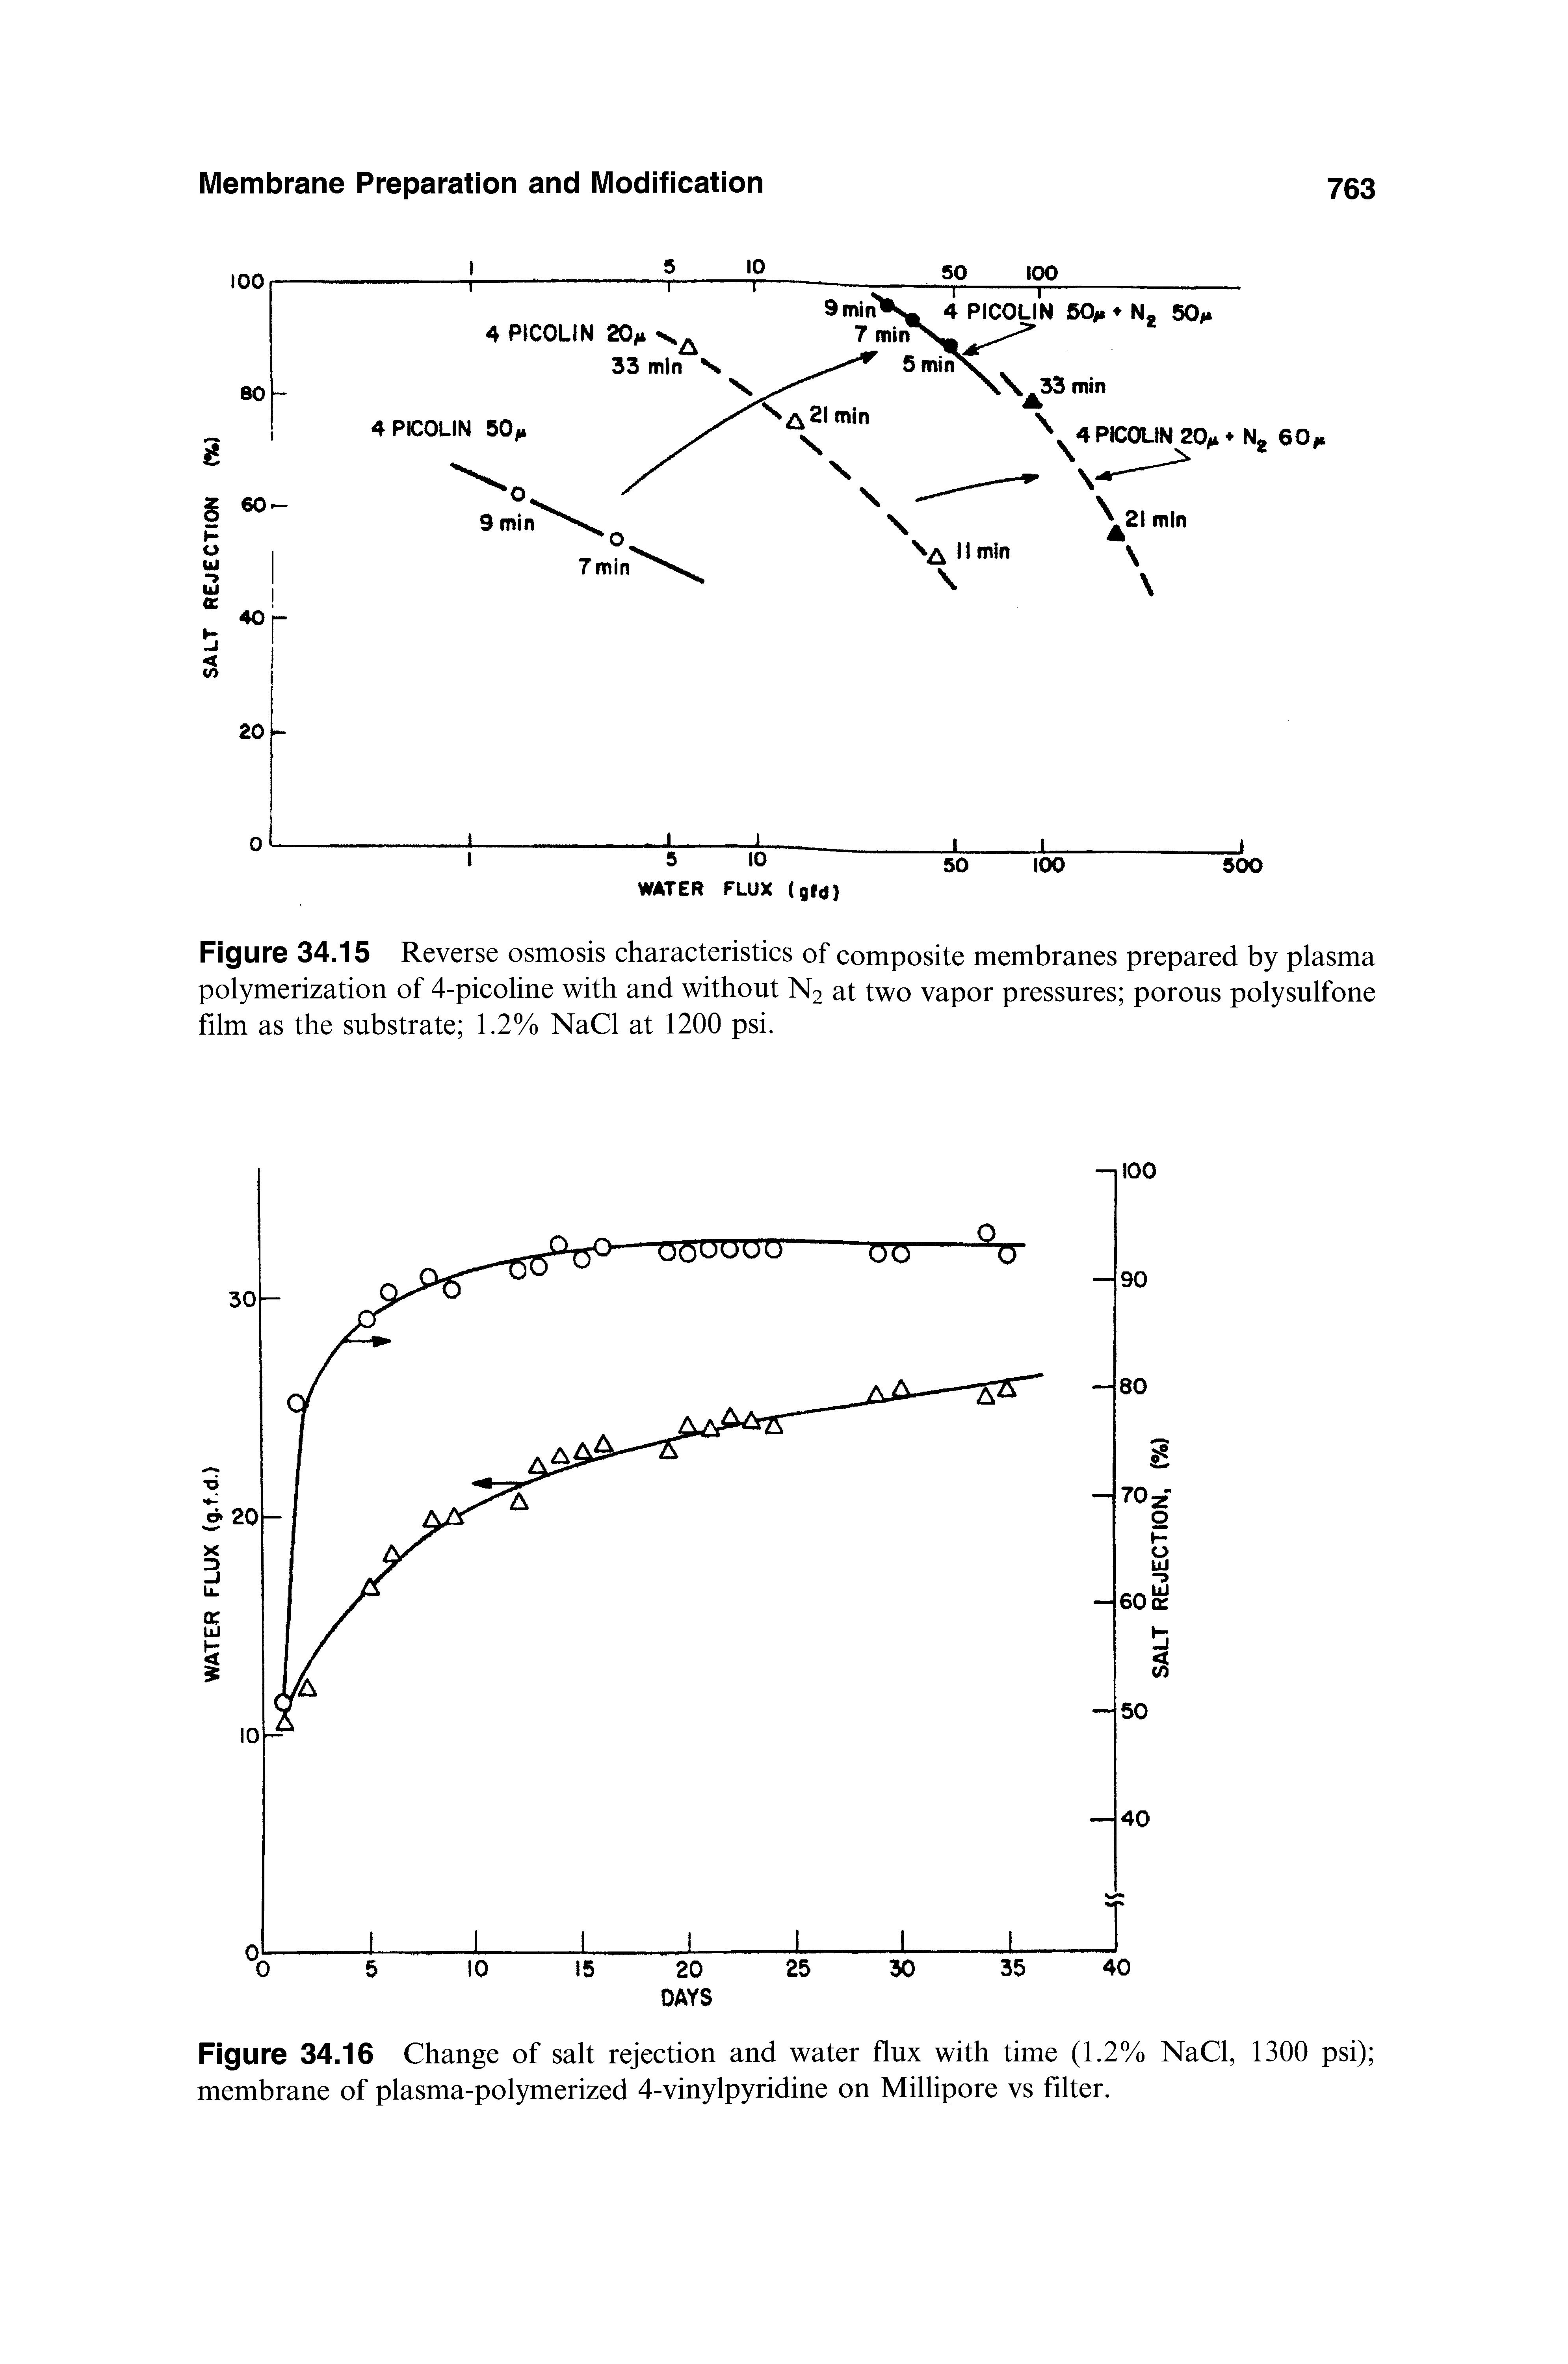 Figure 34.16 Change of salt rejection and water flux with time (1.2% NaCl, 1300 psi) membrane of plasma-polymerized 4-vinylpyridine on Millipore vs filter.